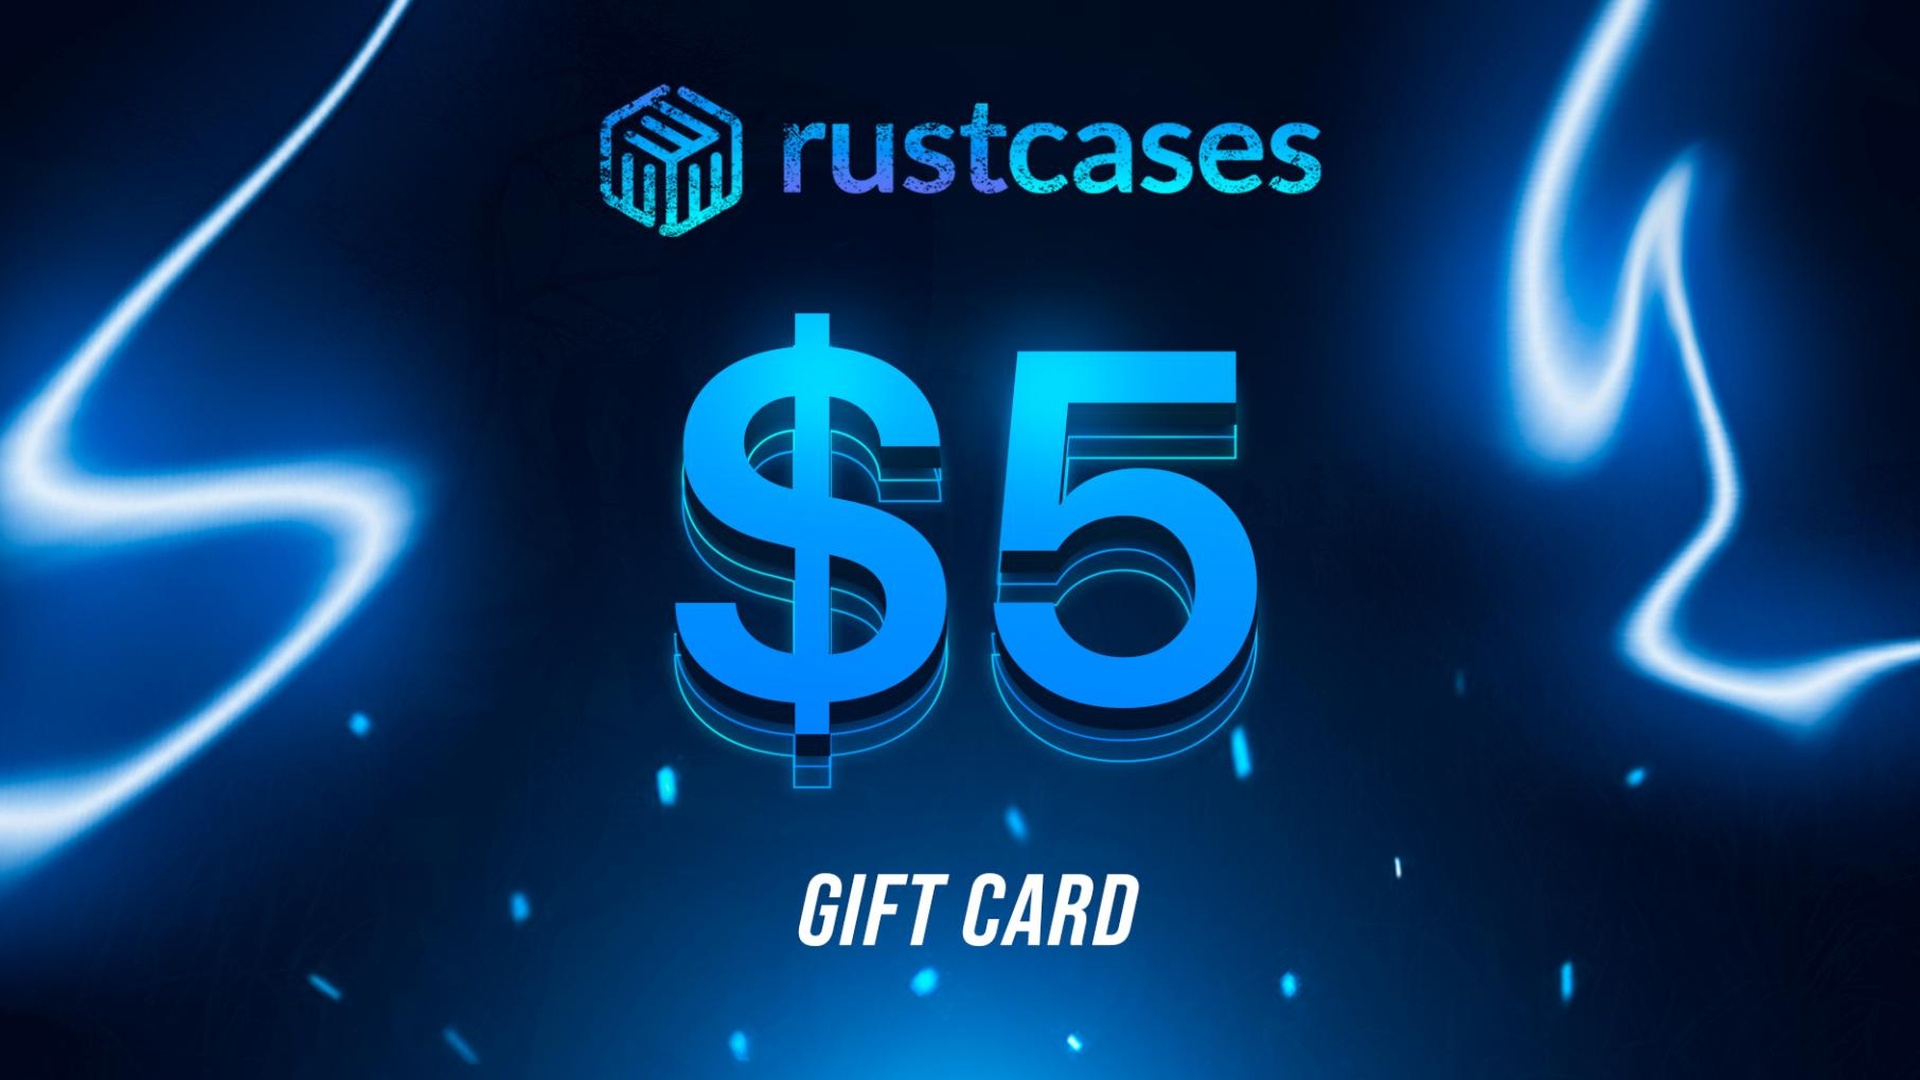 (5.38$) RUSTCASES.com $5 Gift Card